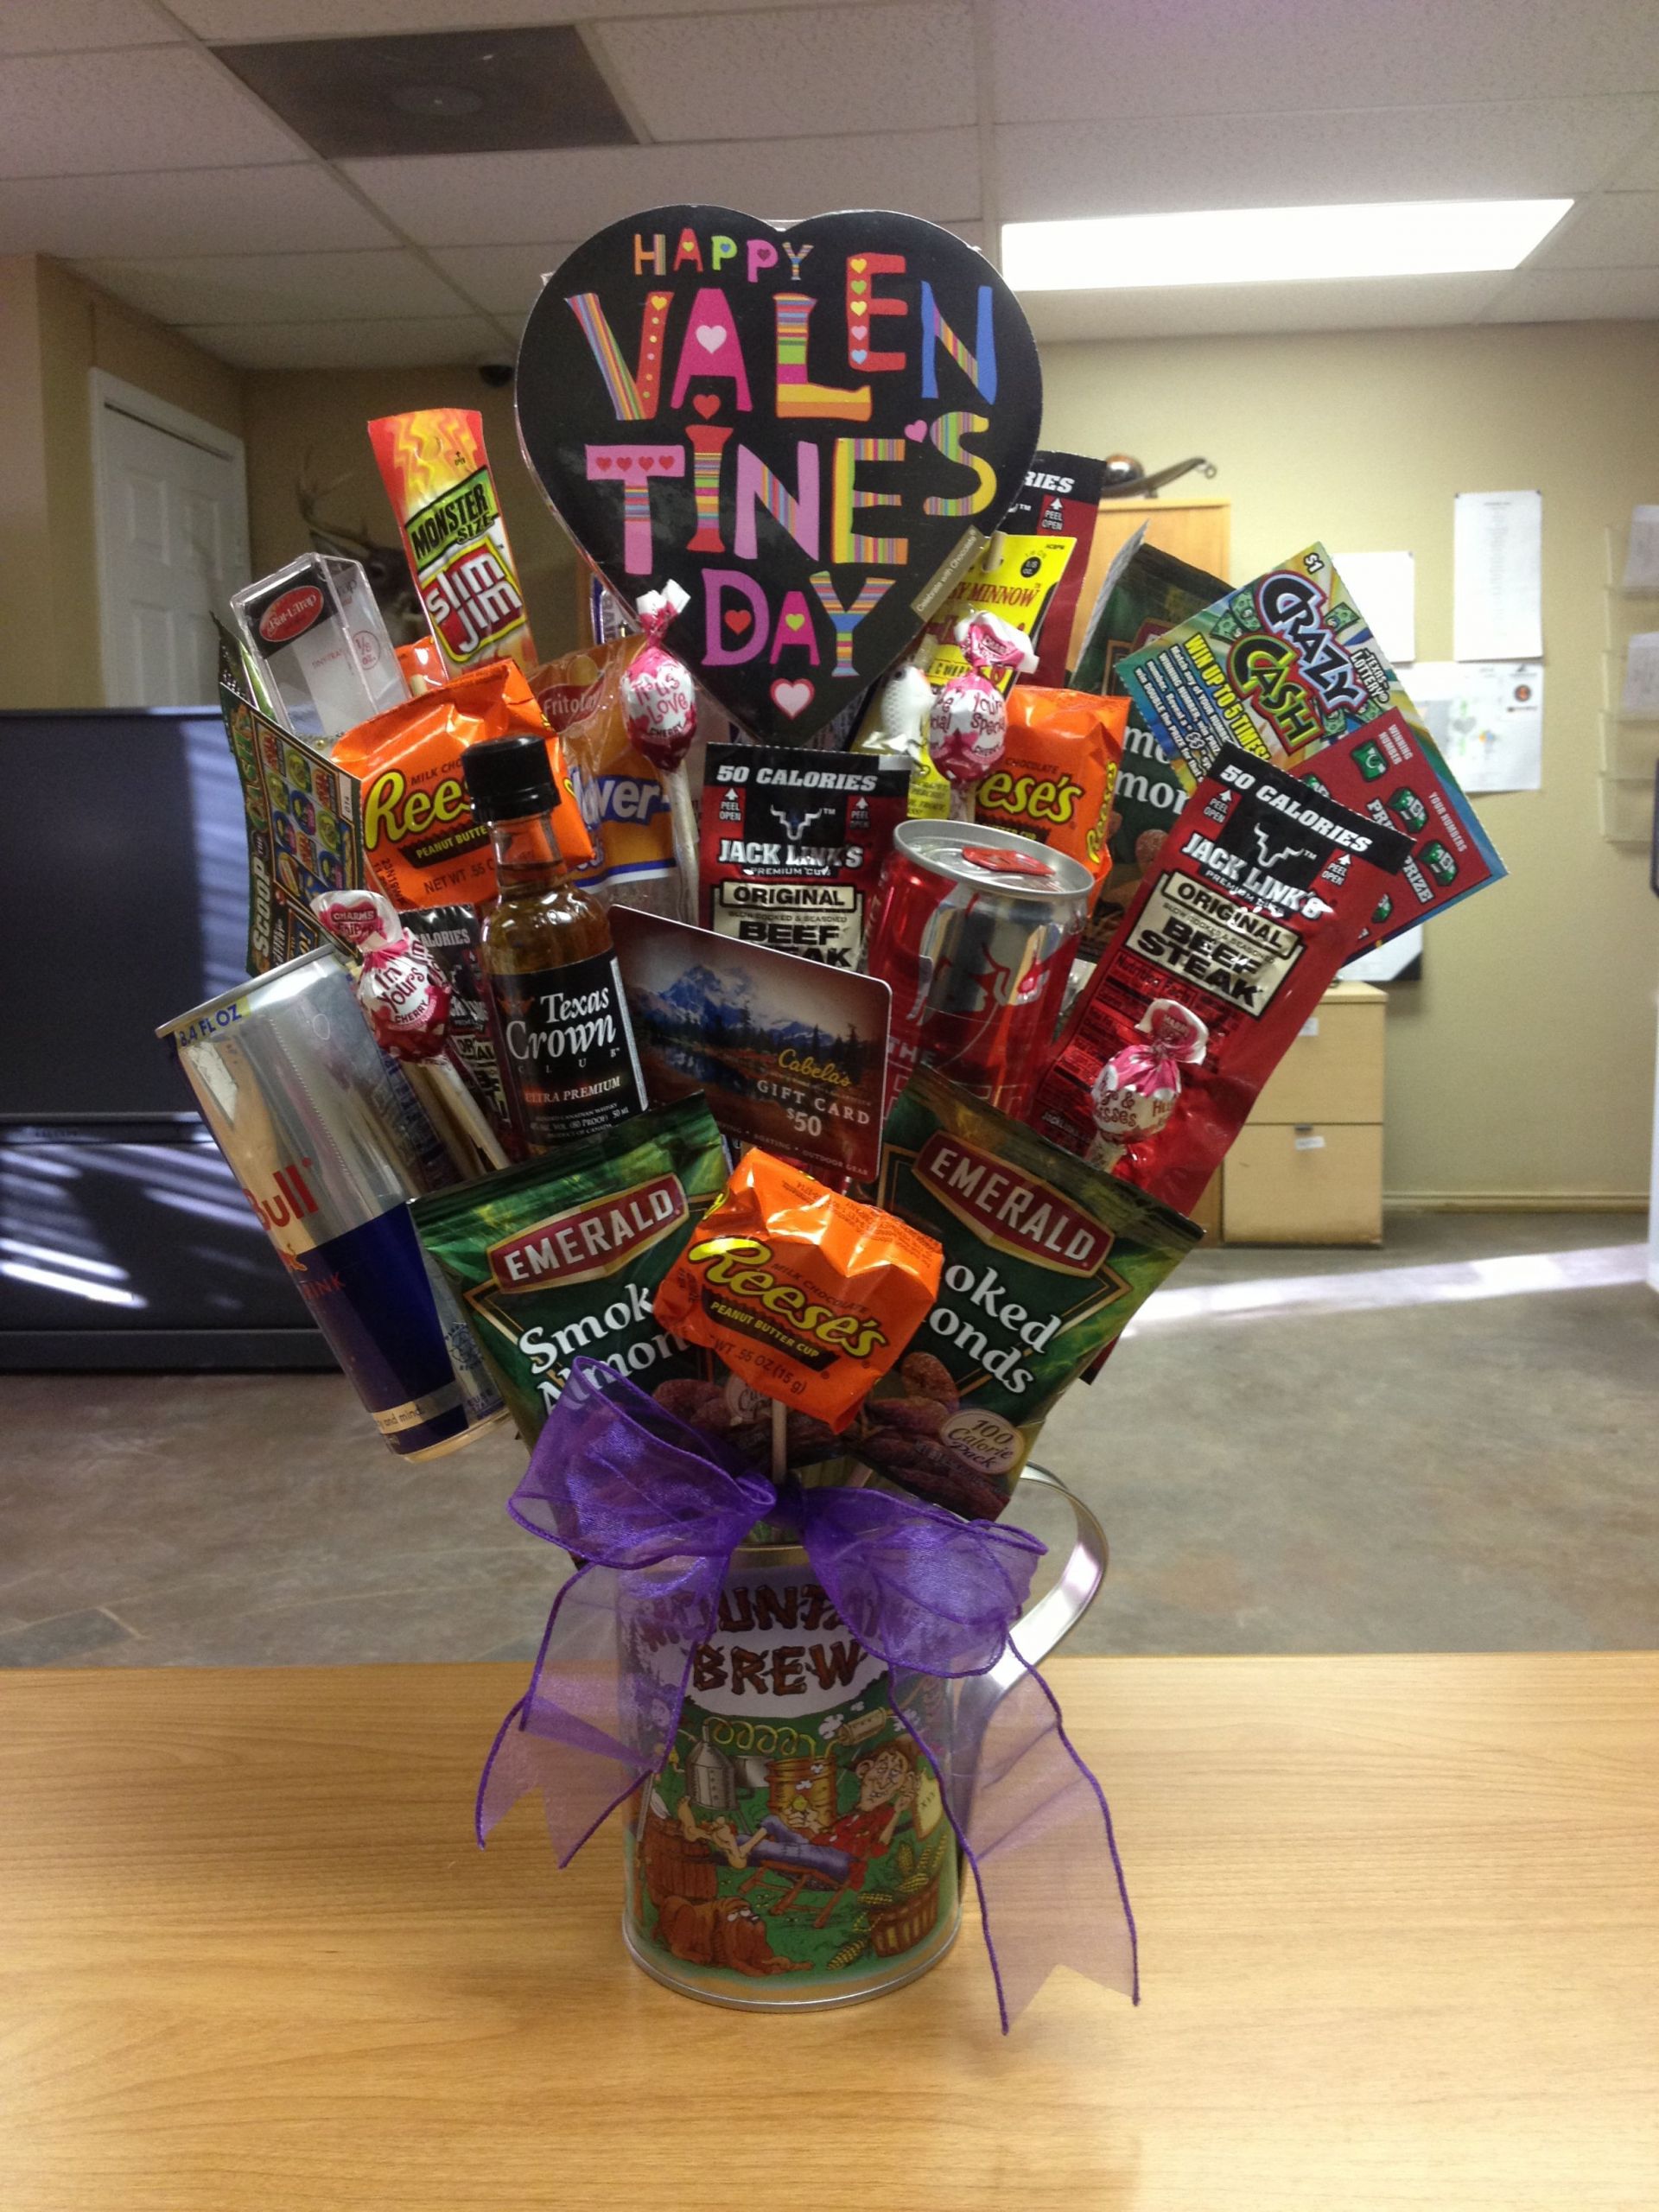 Valentines Gift Basket Ideas For Him
 The Bro Quet I made for my sweetie